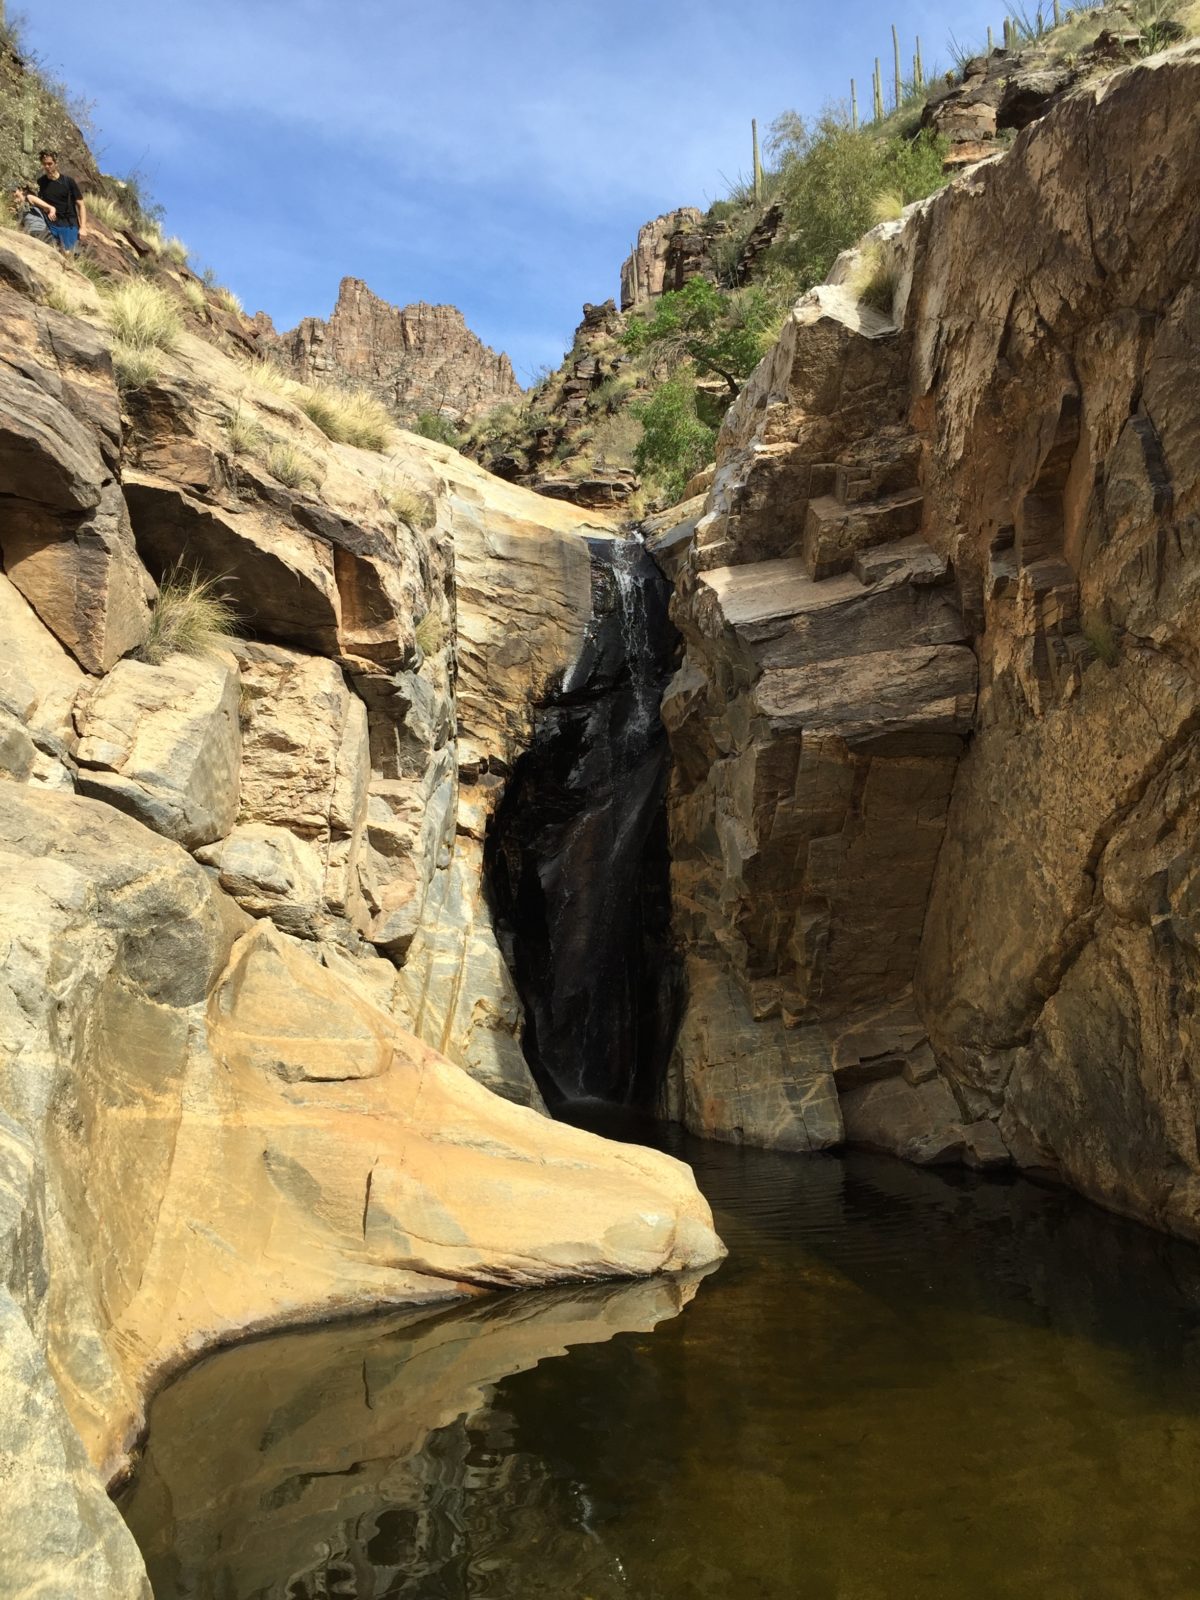 Looking for (and Finding) Streams in Your Desert